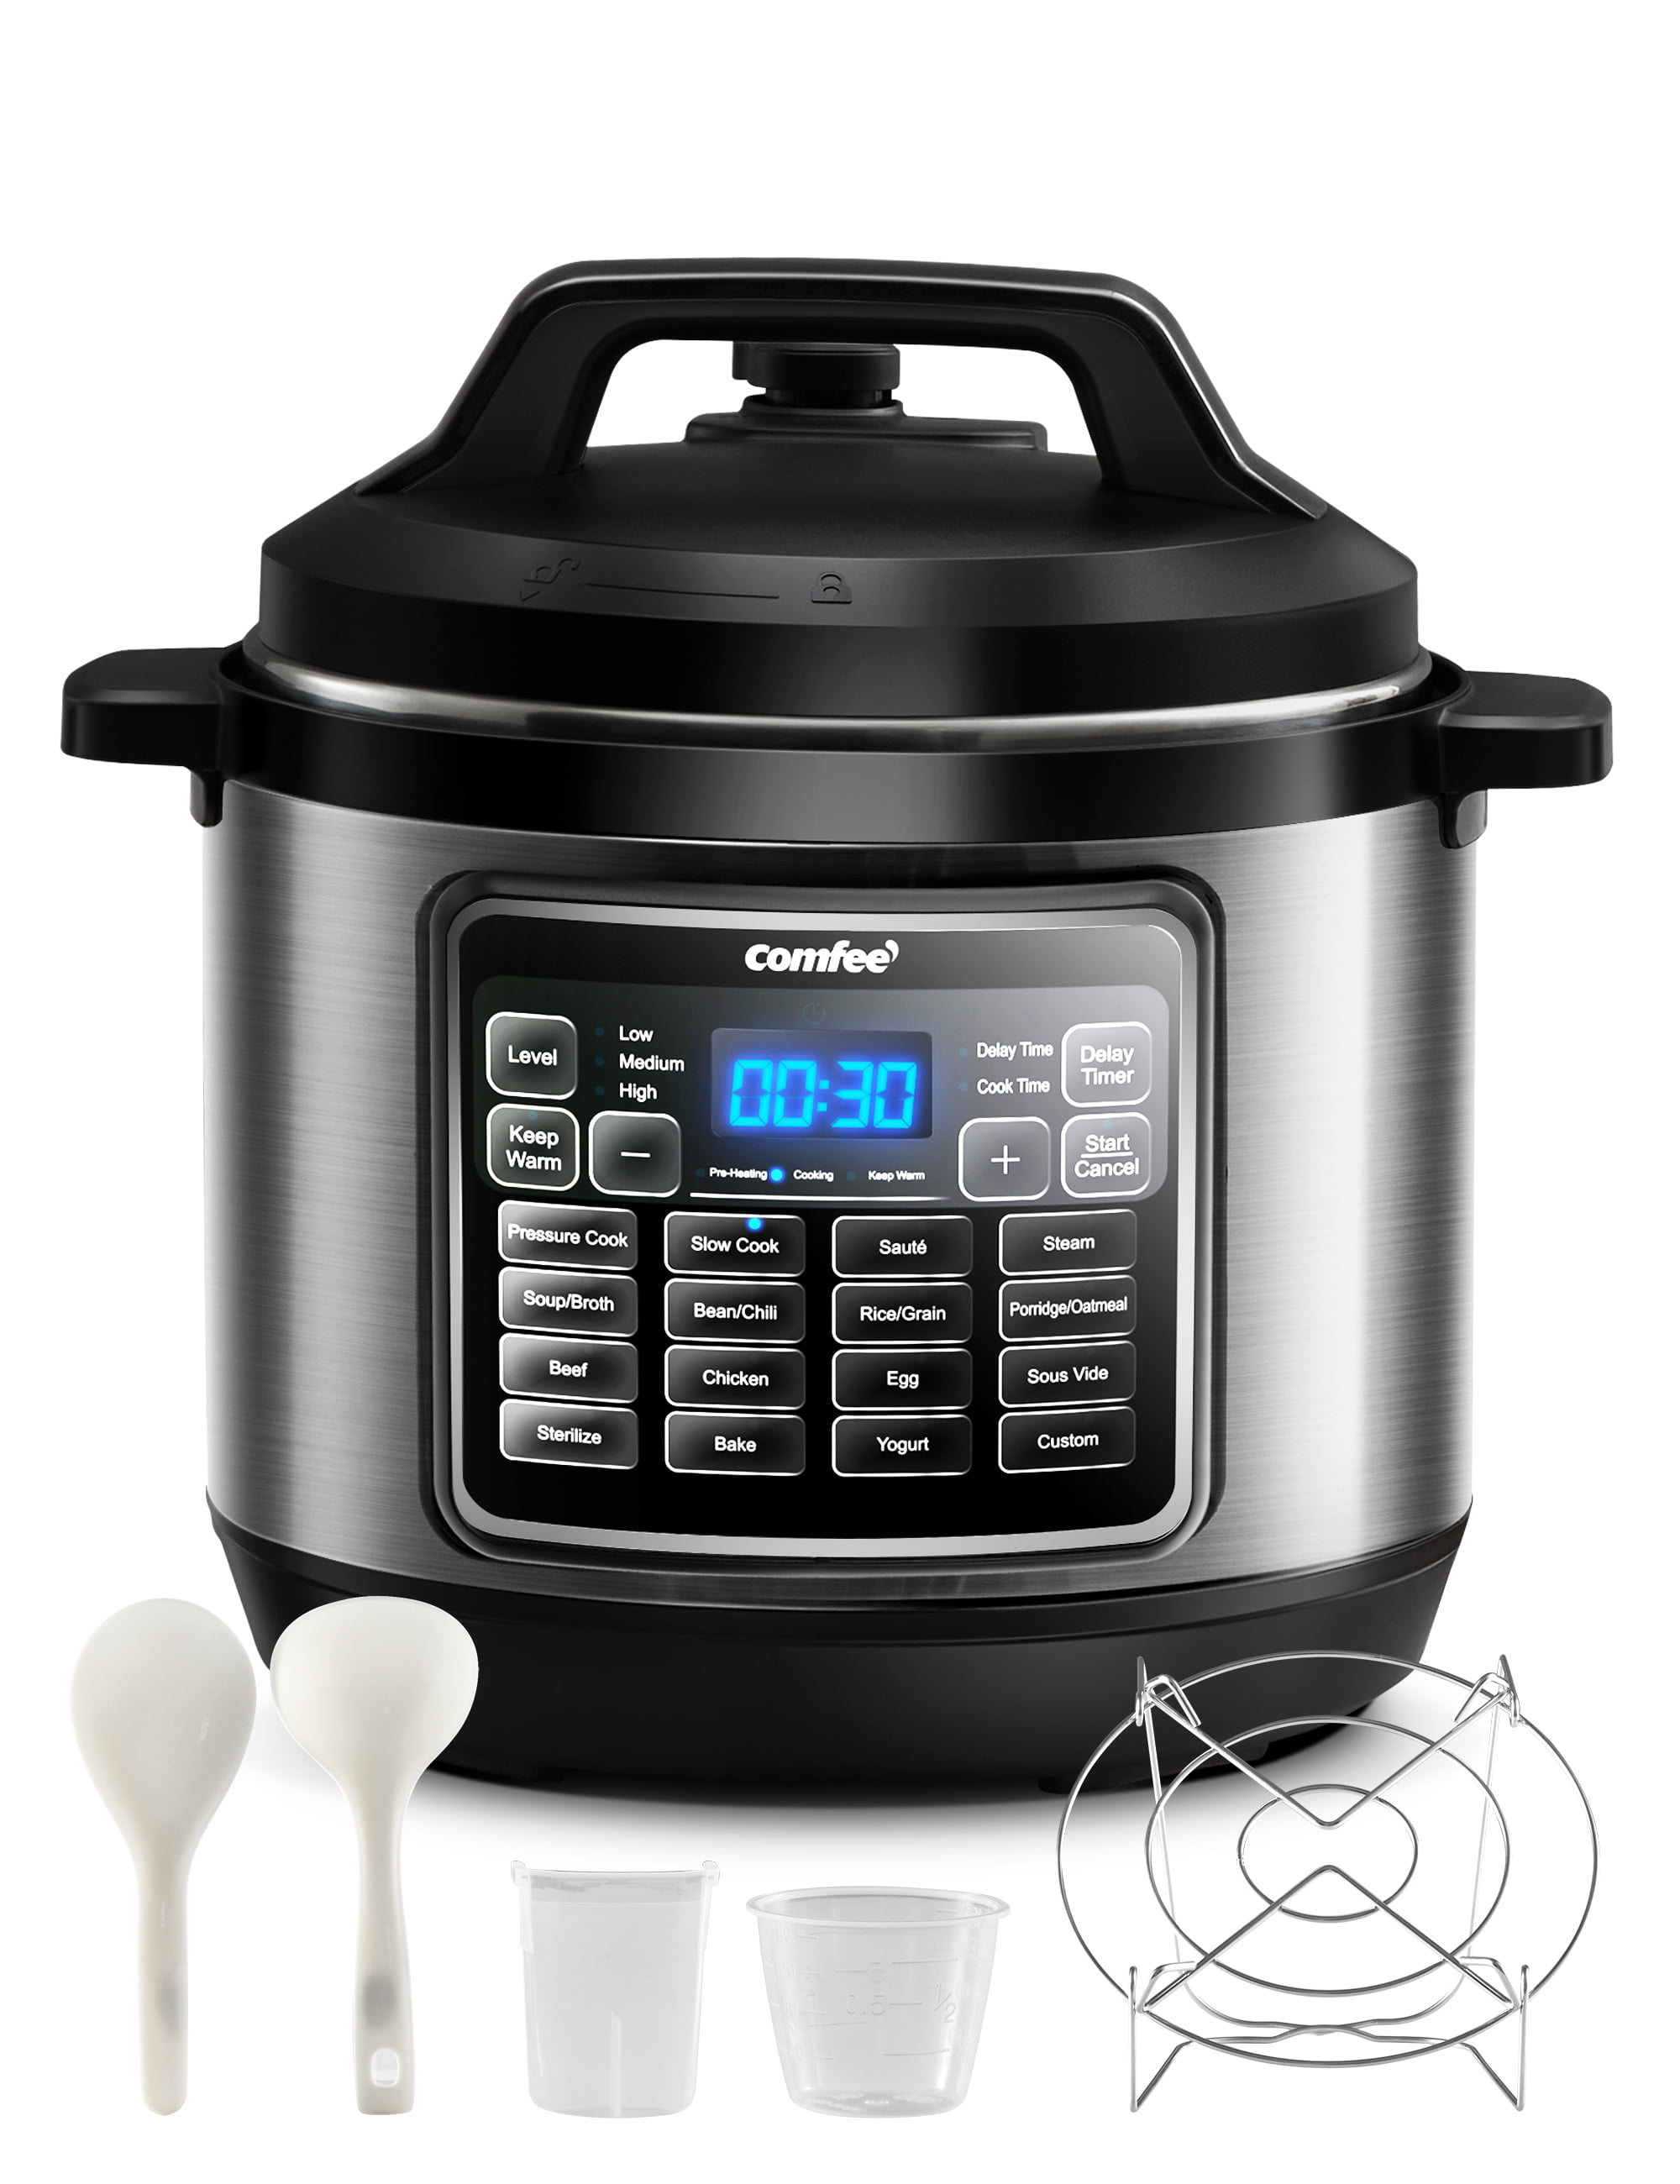 IRIS USA 3 Qt. 8-in-1 Electric Pressure Cooker, Slow Cooker, Rice Cooker,  Steamer, Sear & Sauté, Yogurt, Compact Multi-Cooker for 2-3 People with  Over 110 Pre-Programmed Recipes, Vegan Friendly, Black